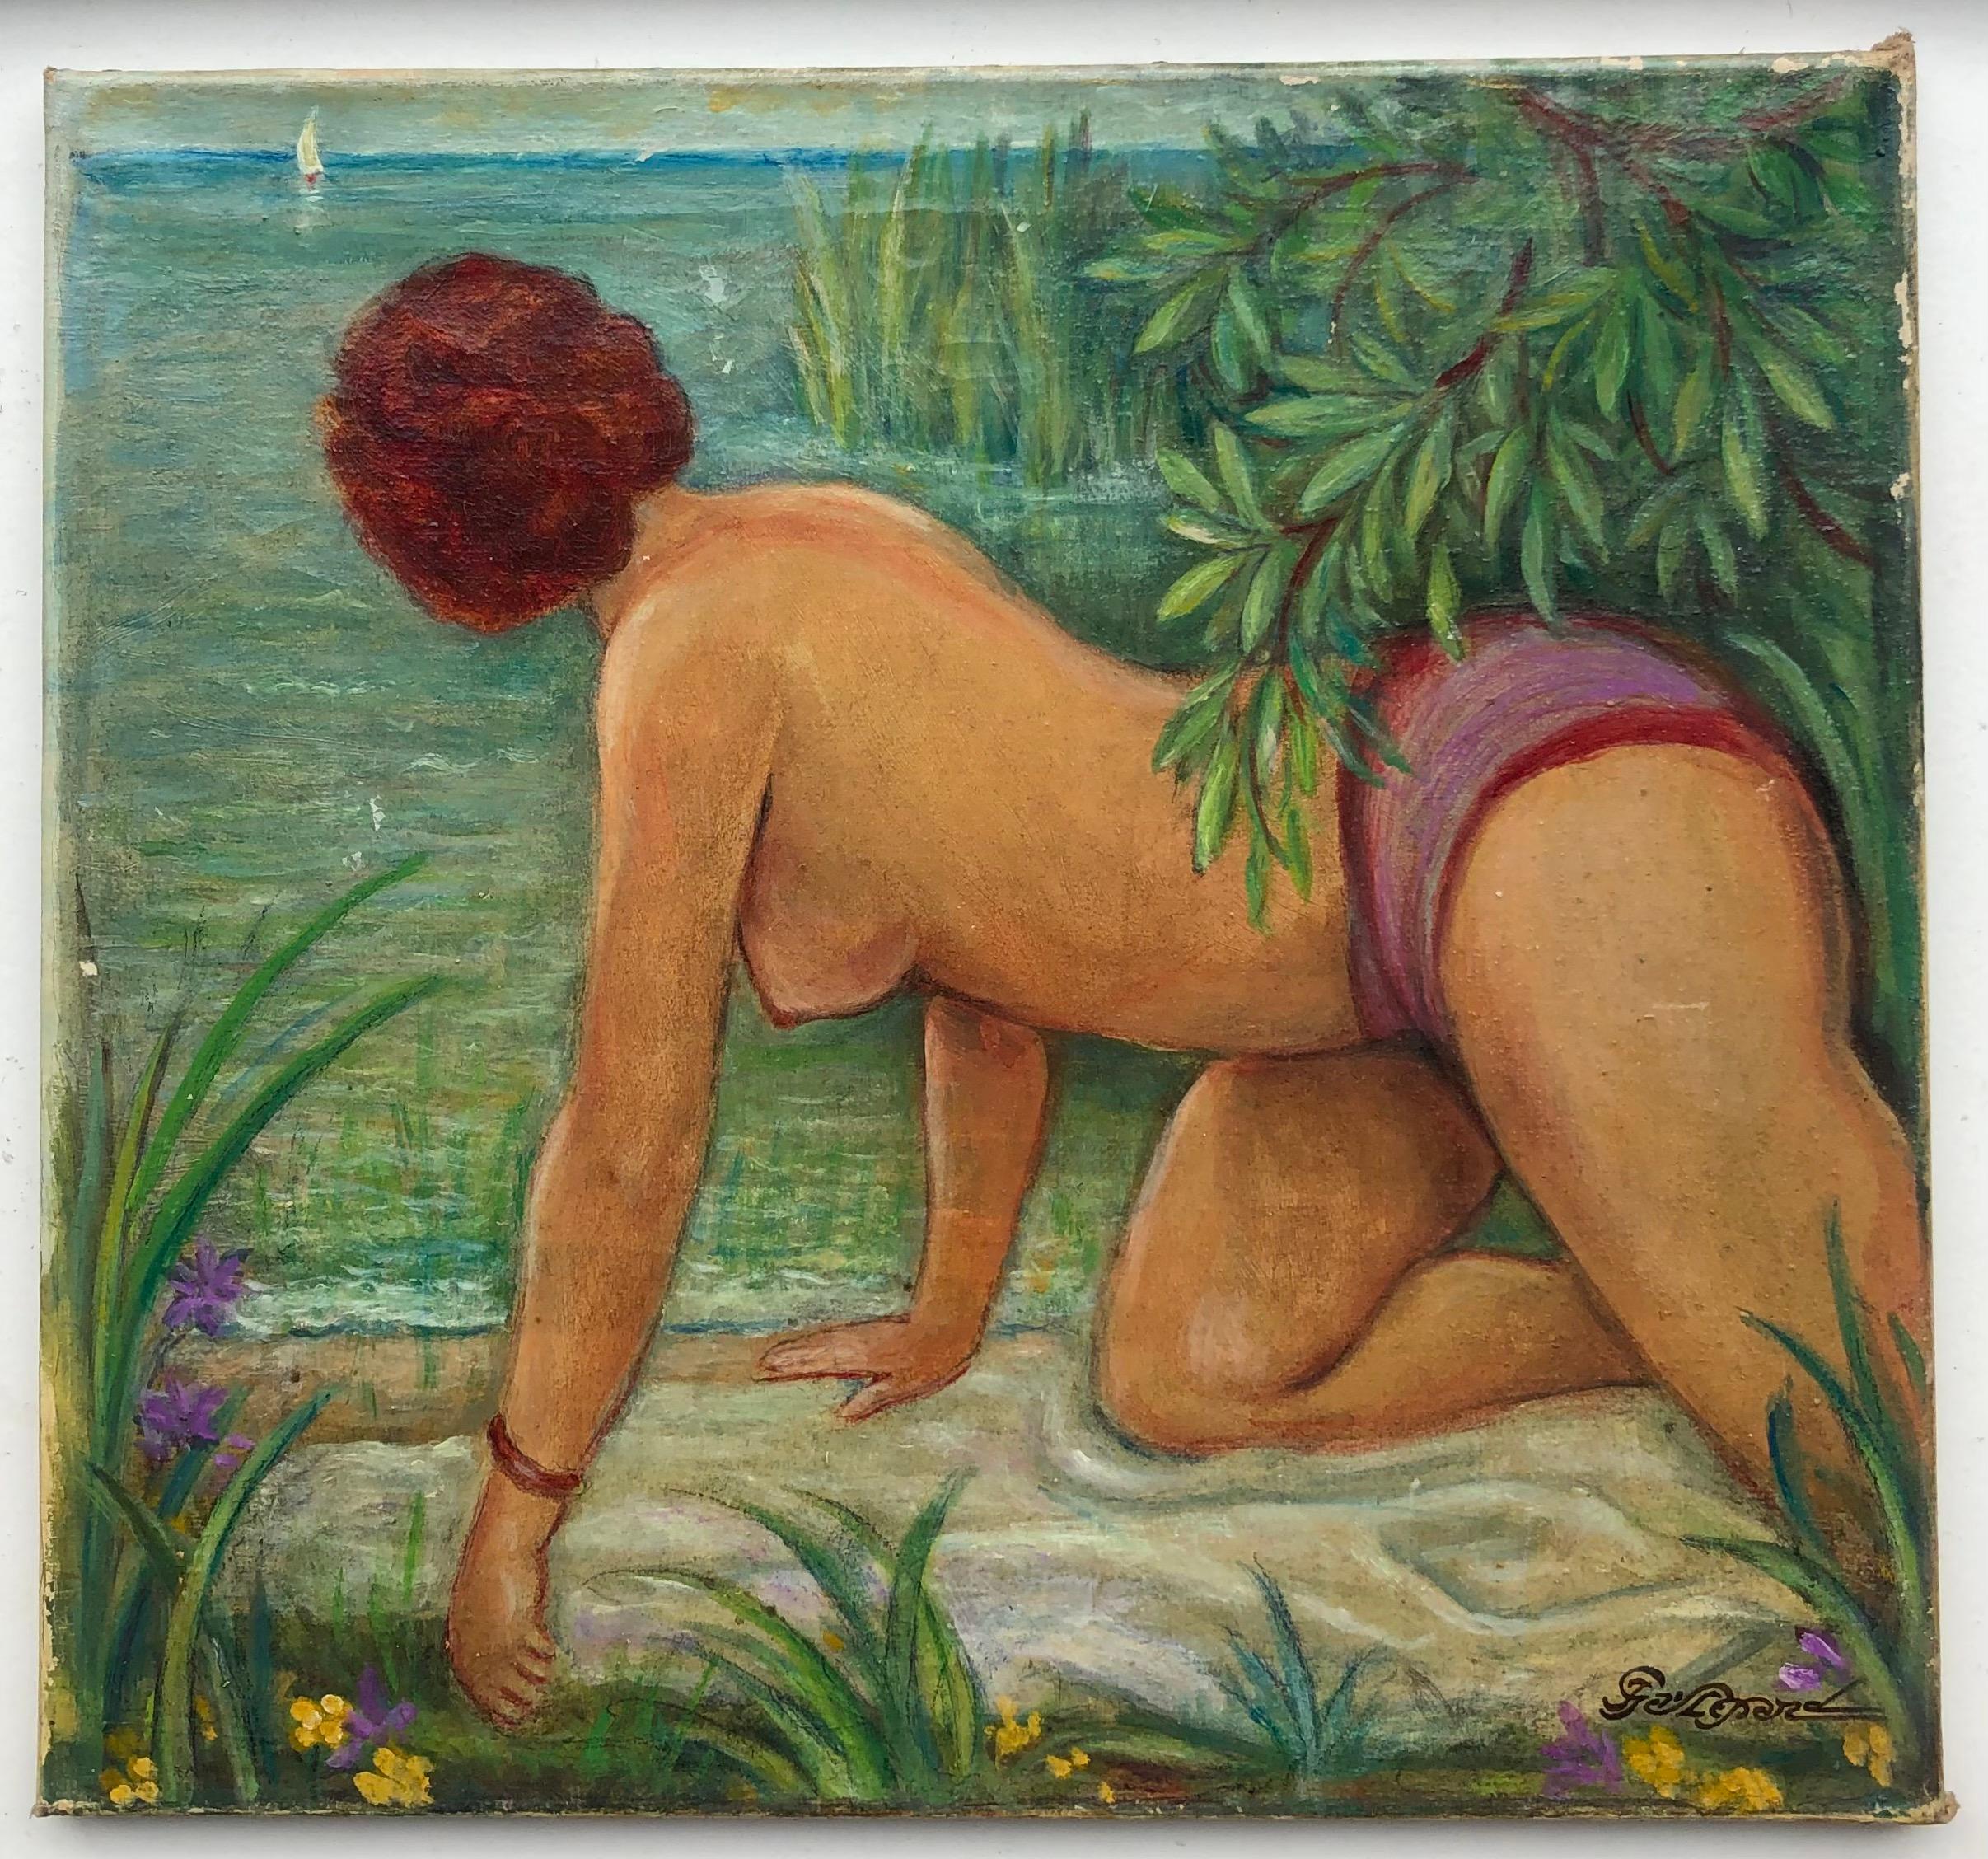 The worried bather - Painting by Jules Gaillepand